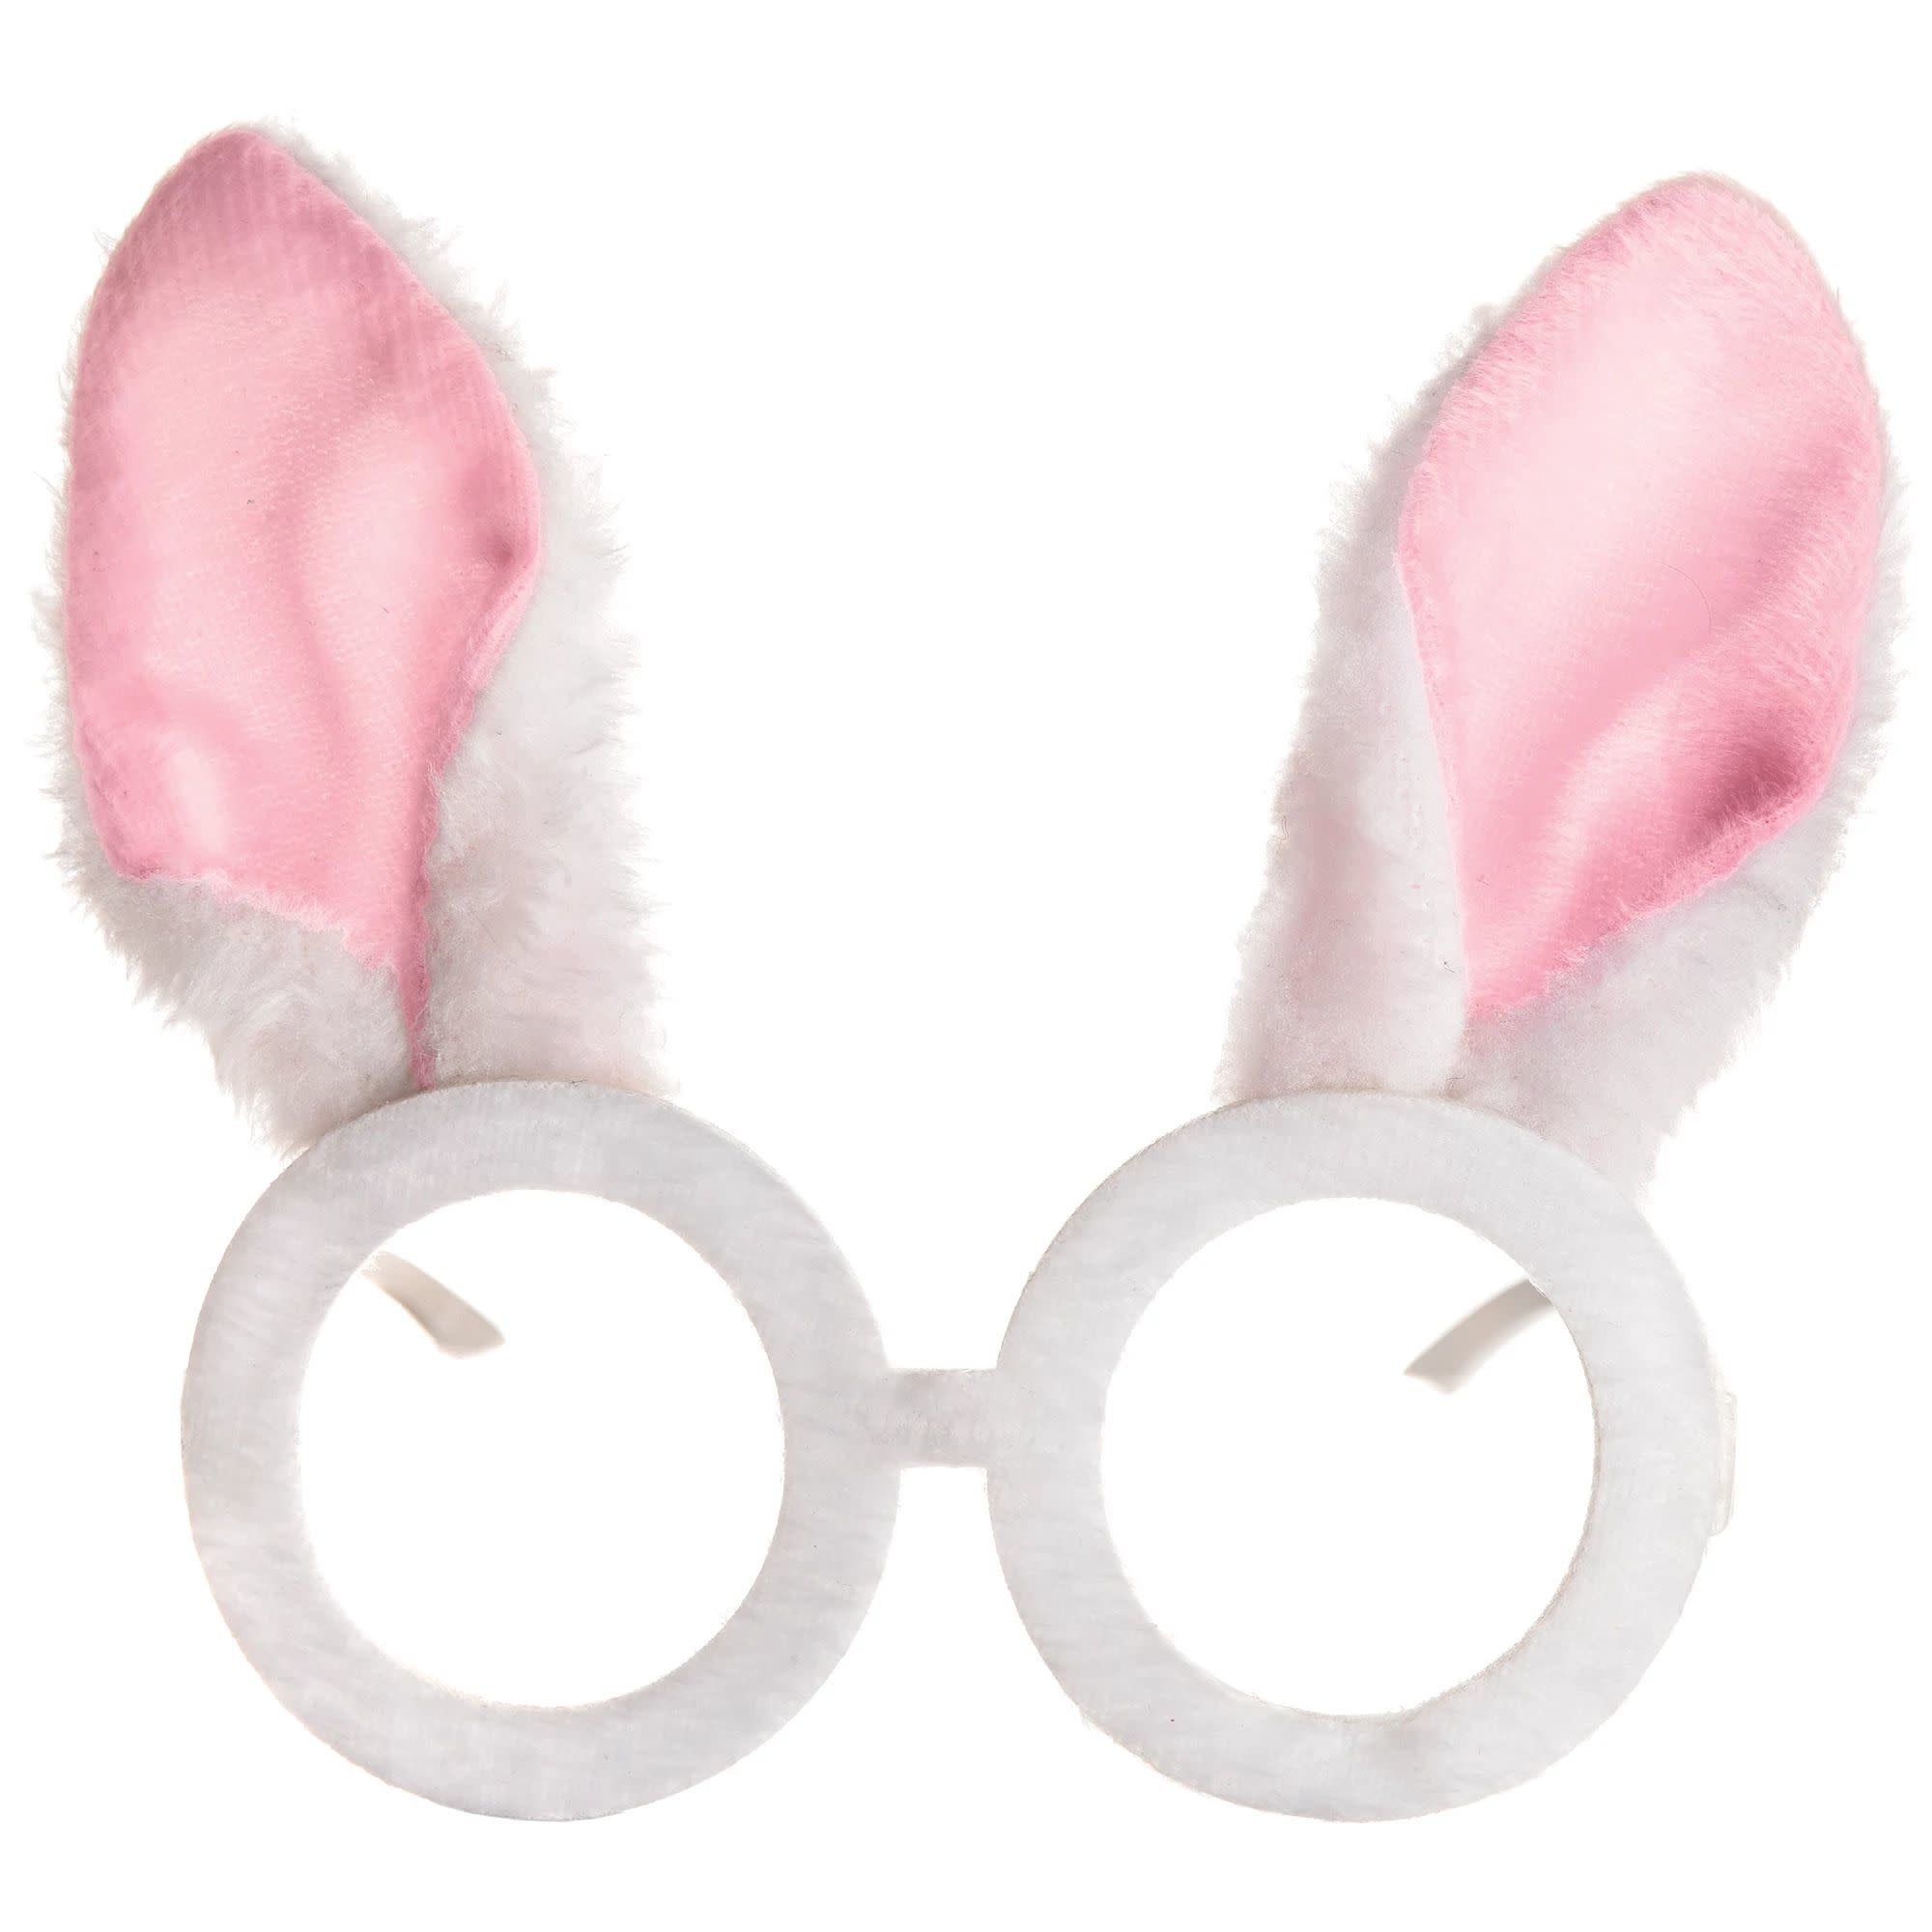 Summer Glowstick Accessory Set, Includes Hat, Glasses, Bunny Ears